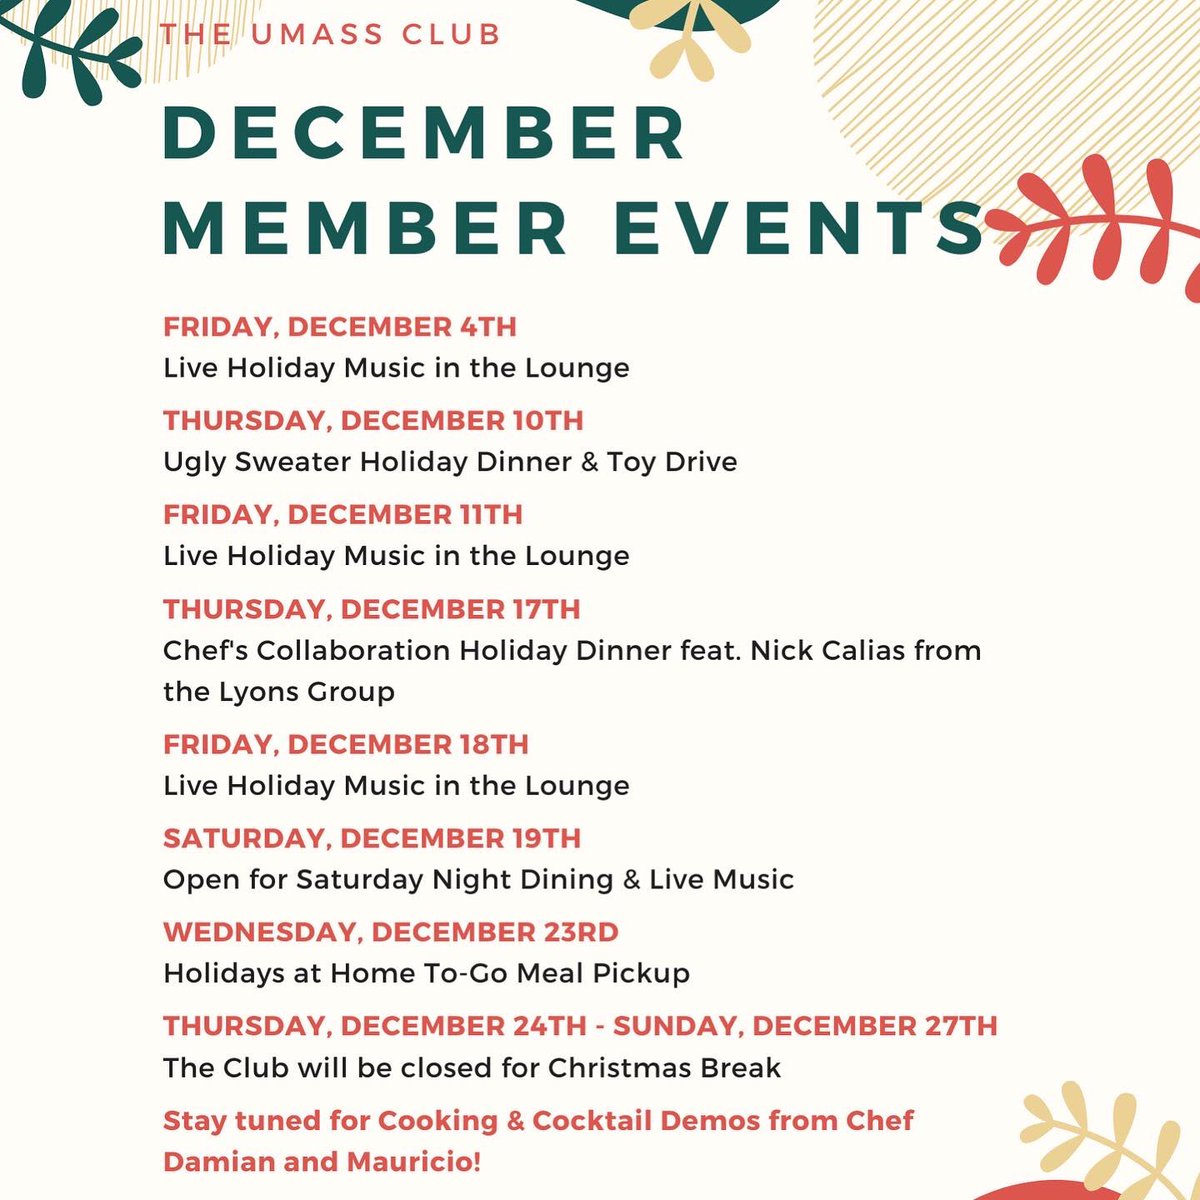 Happy December 1st 🎄 Although things will be a little bit different this year, we look forward to making the most of this holiday season with our Members! We've got lots of festive events in store... #UMassClub #holidays #membershipmatters #clublife #physicaldistancing #December